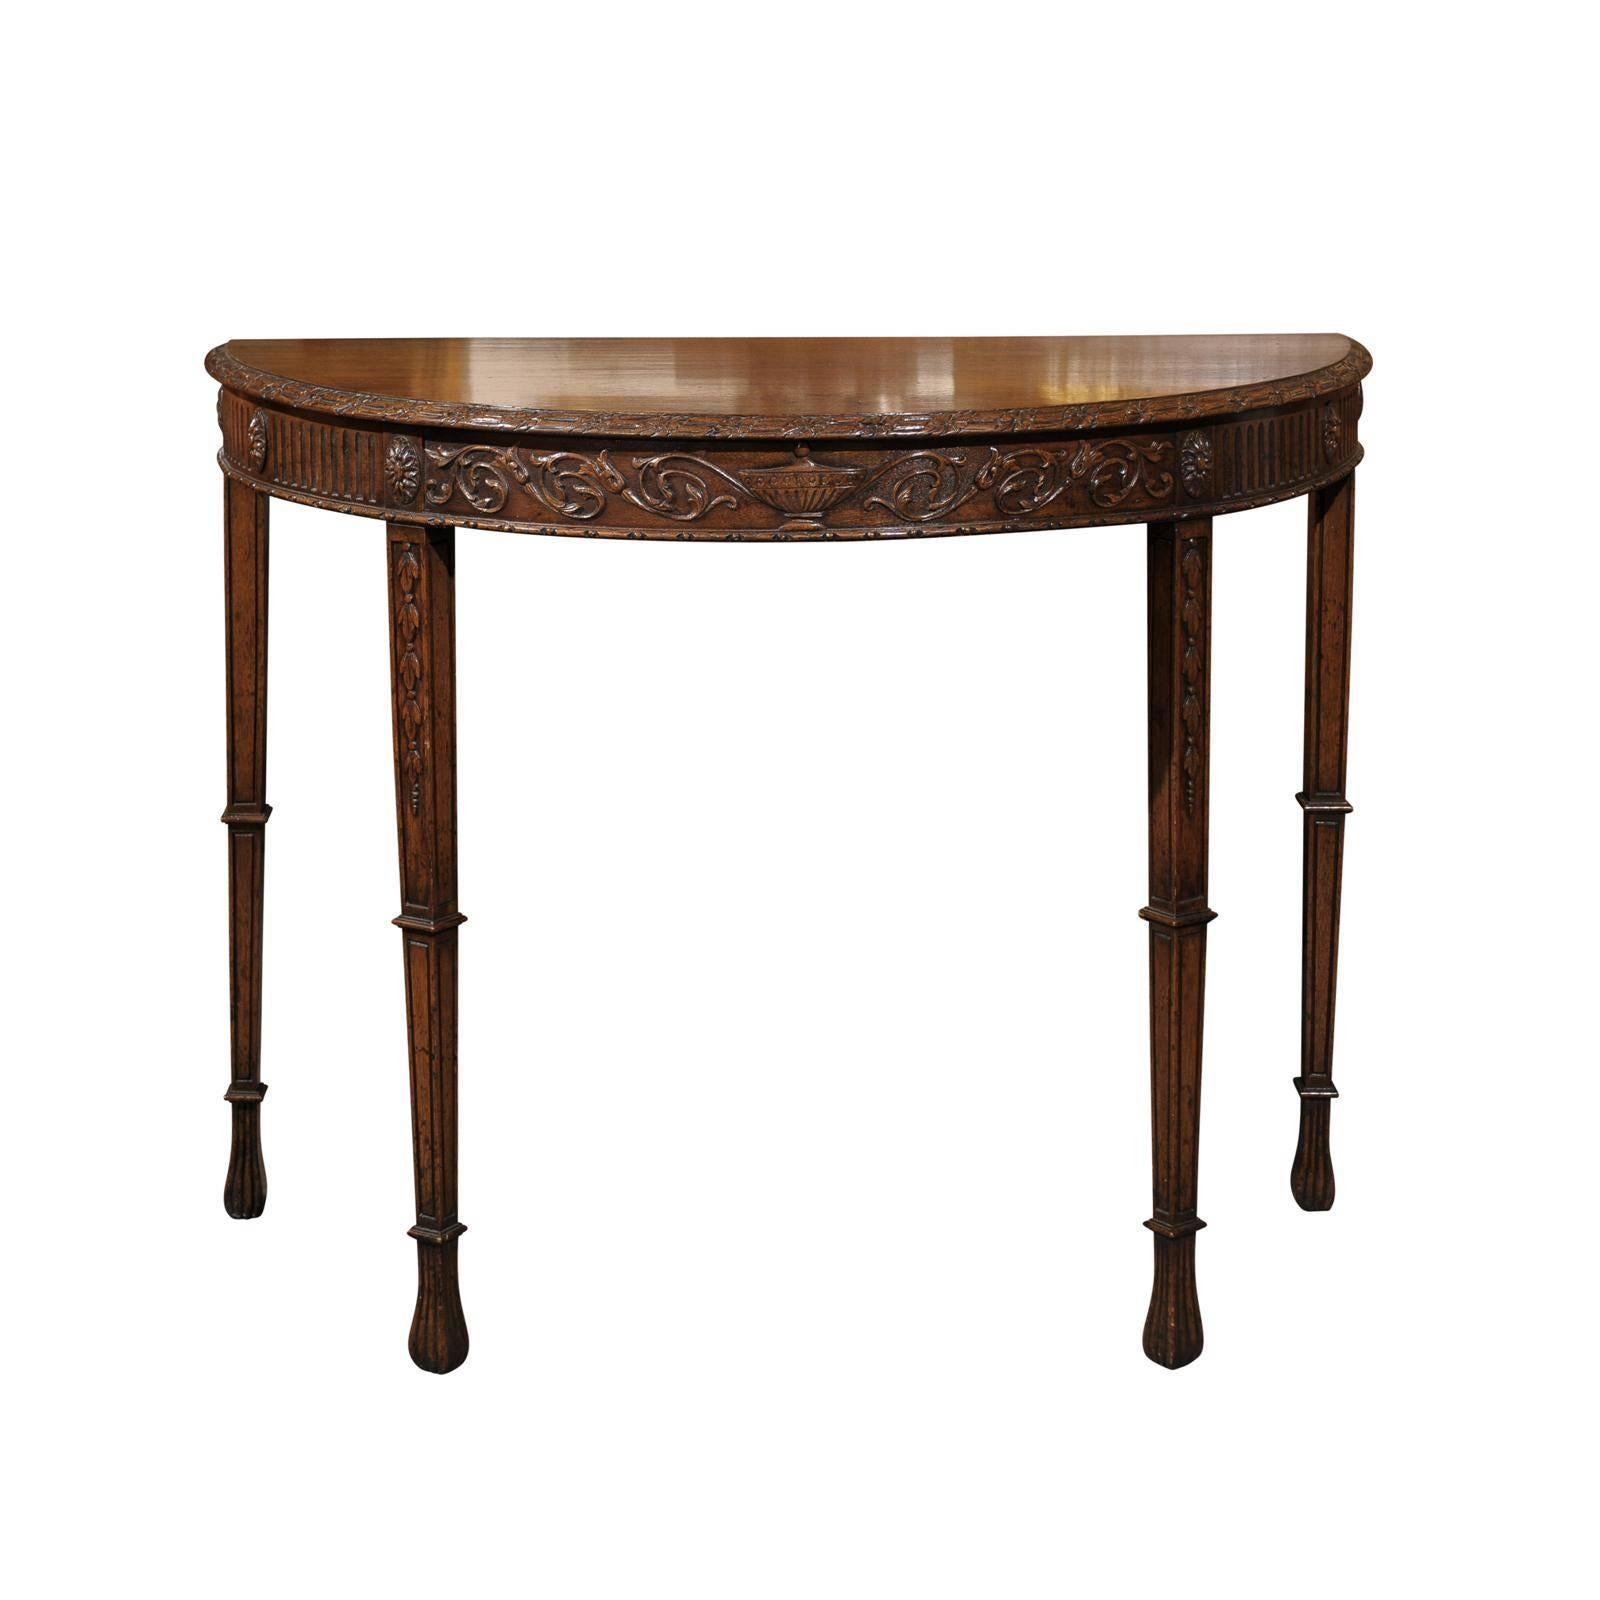 English Turn of the Century Wooden Demi-Lune Table with Carved Apron For Sale